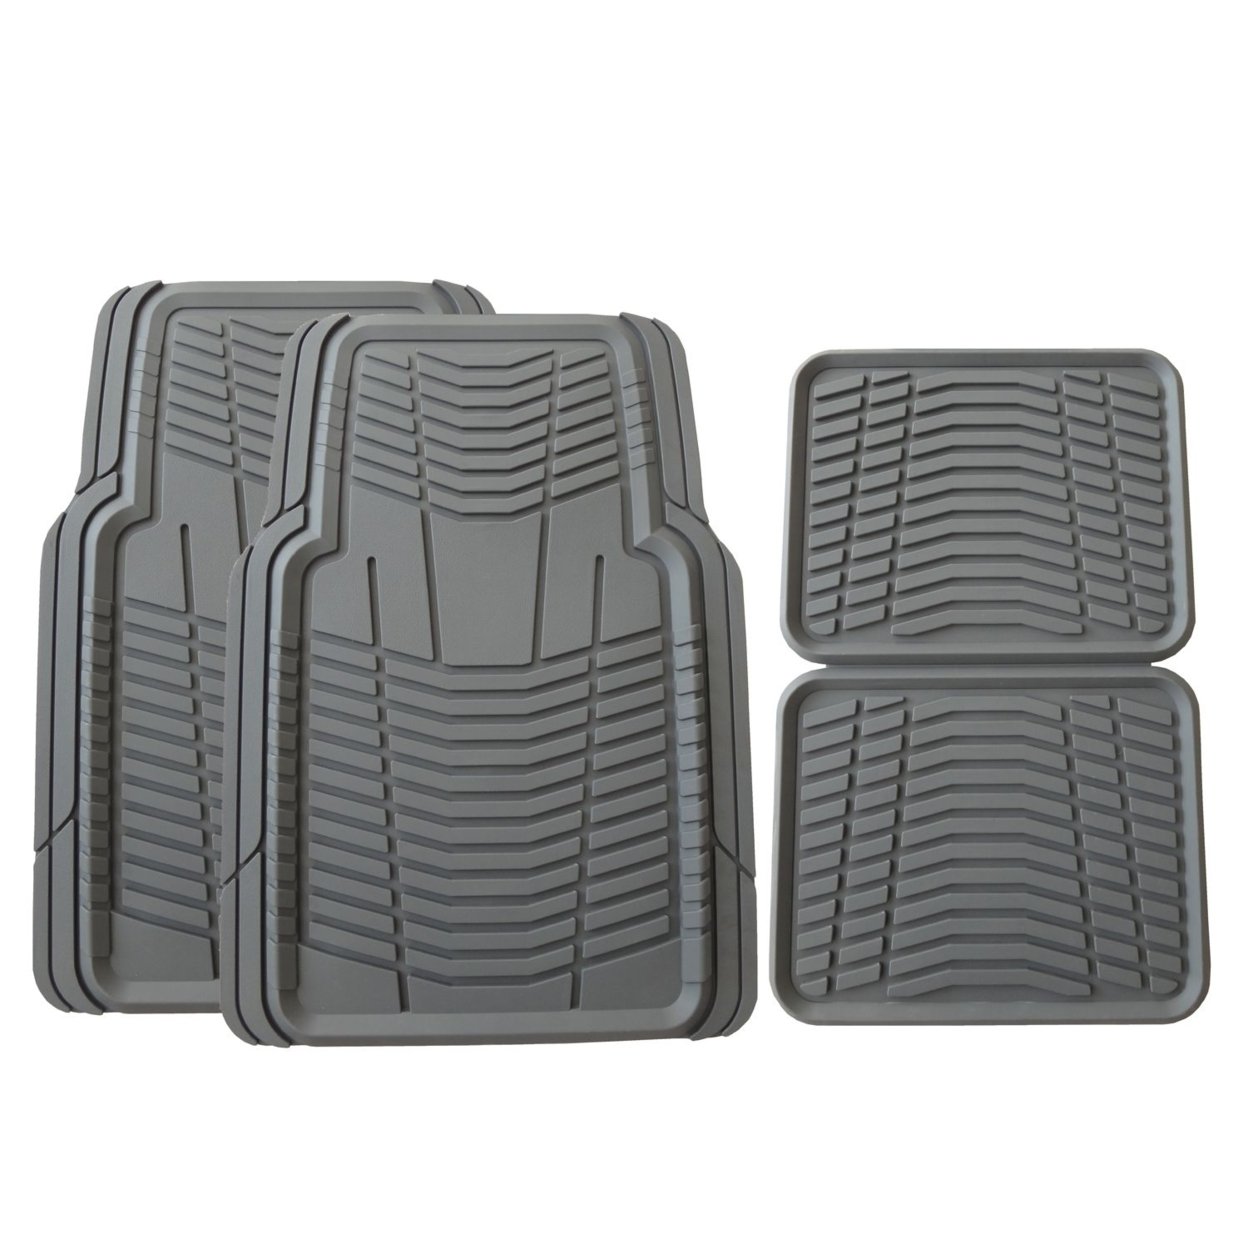 Member's Mark All-Weather Automotive Floor Mats (4 Pack, Gray)